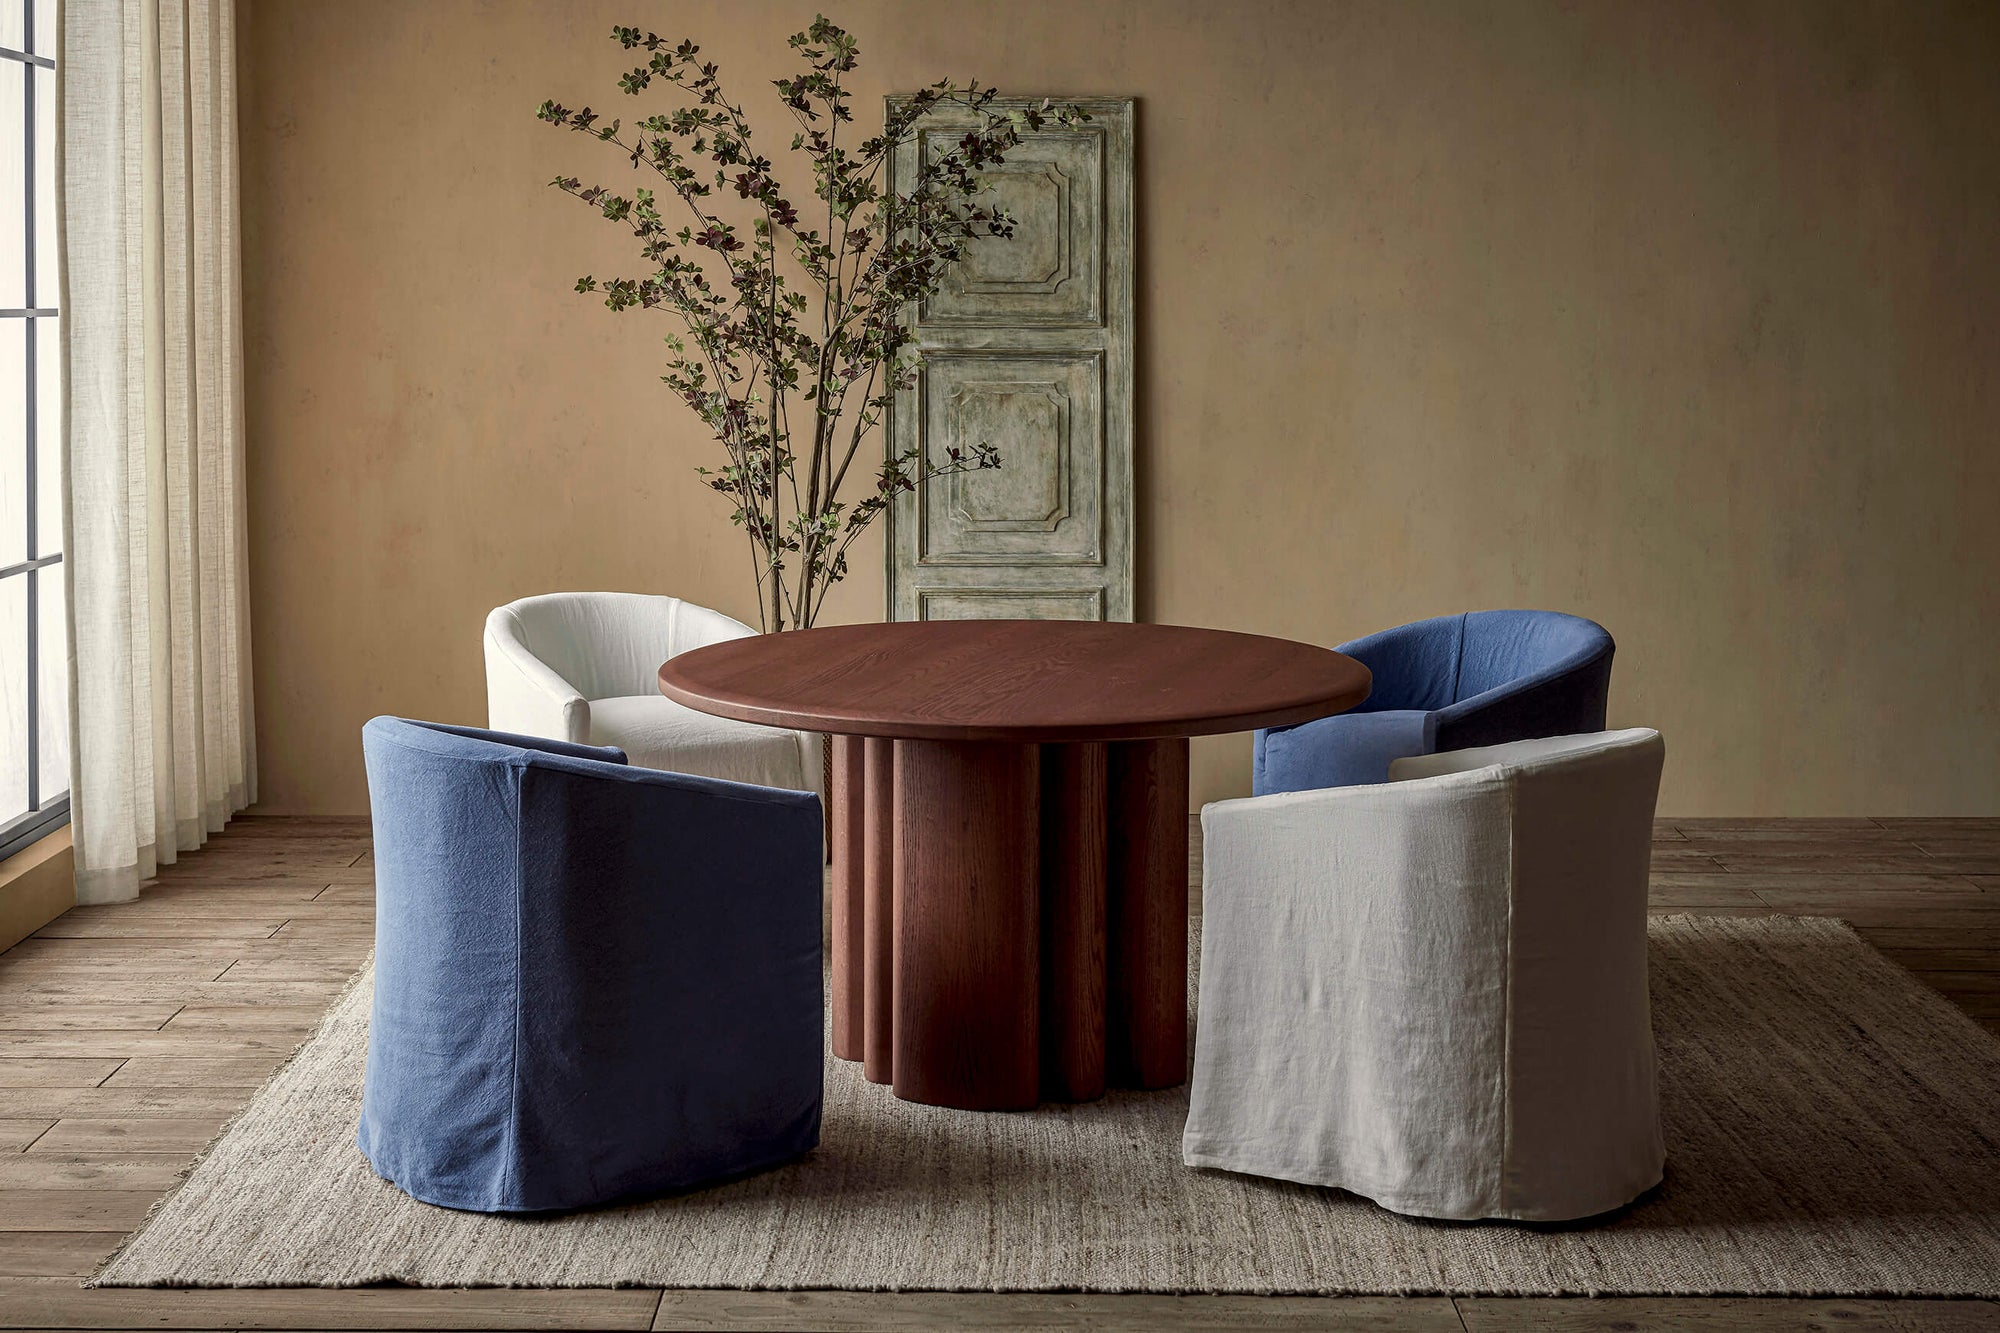 Four Ziki Dining Chairs in various colors placed around the Enzo Dining Table in Spiced Oak